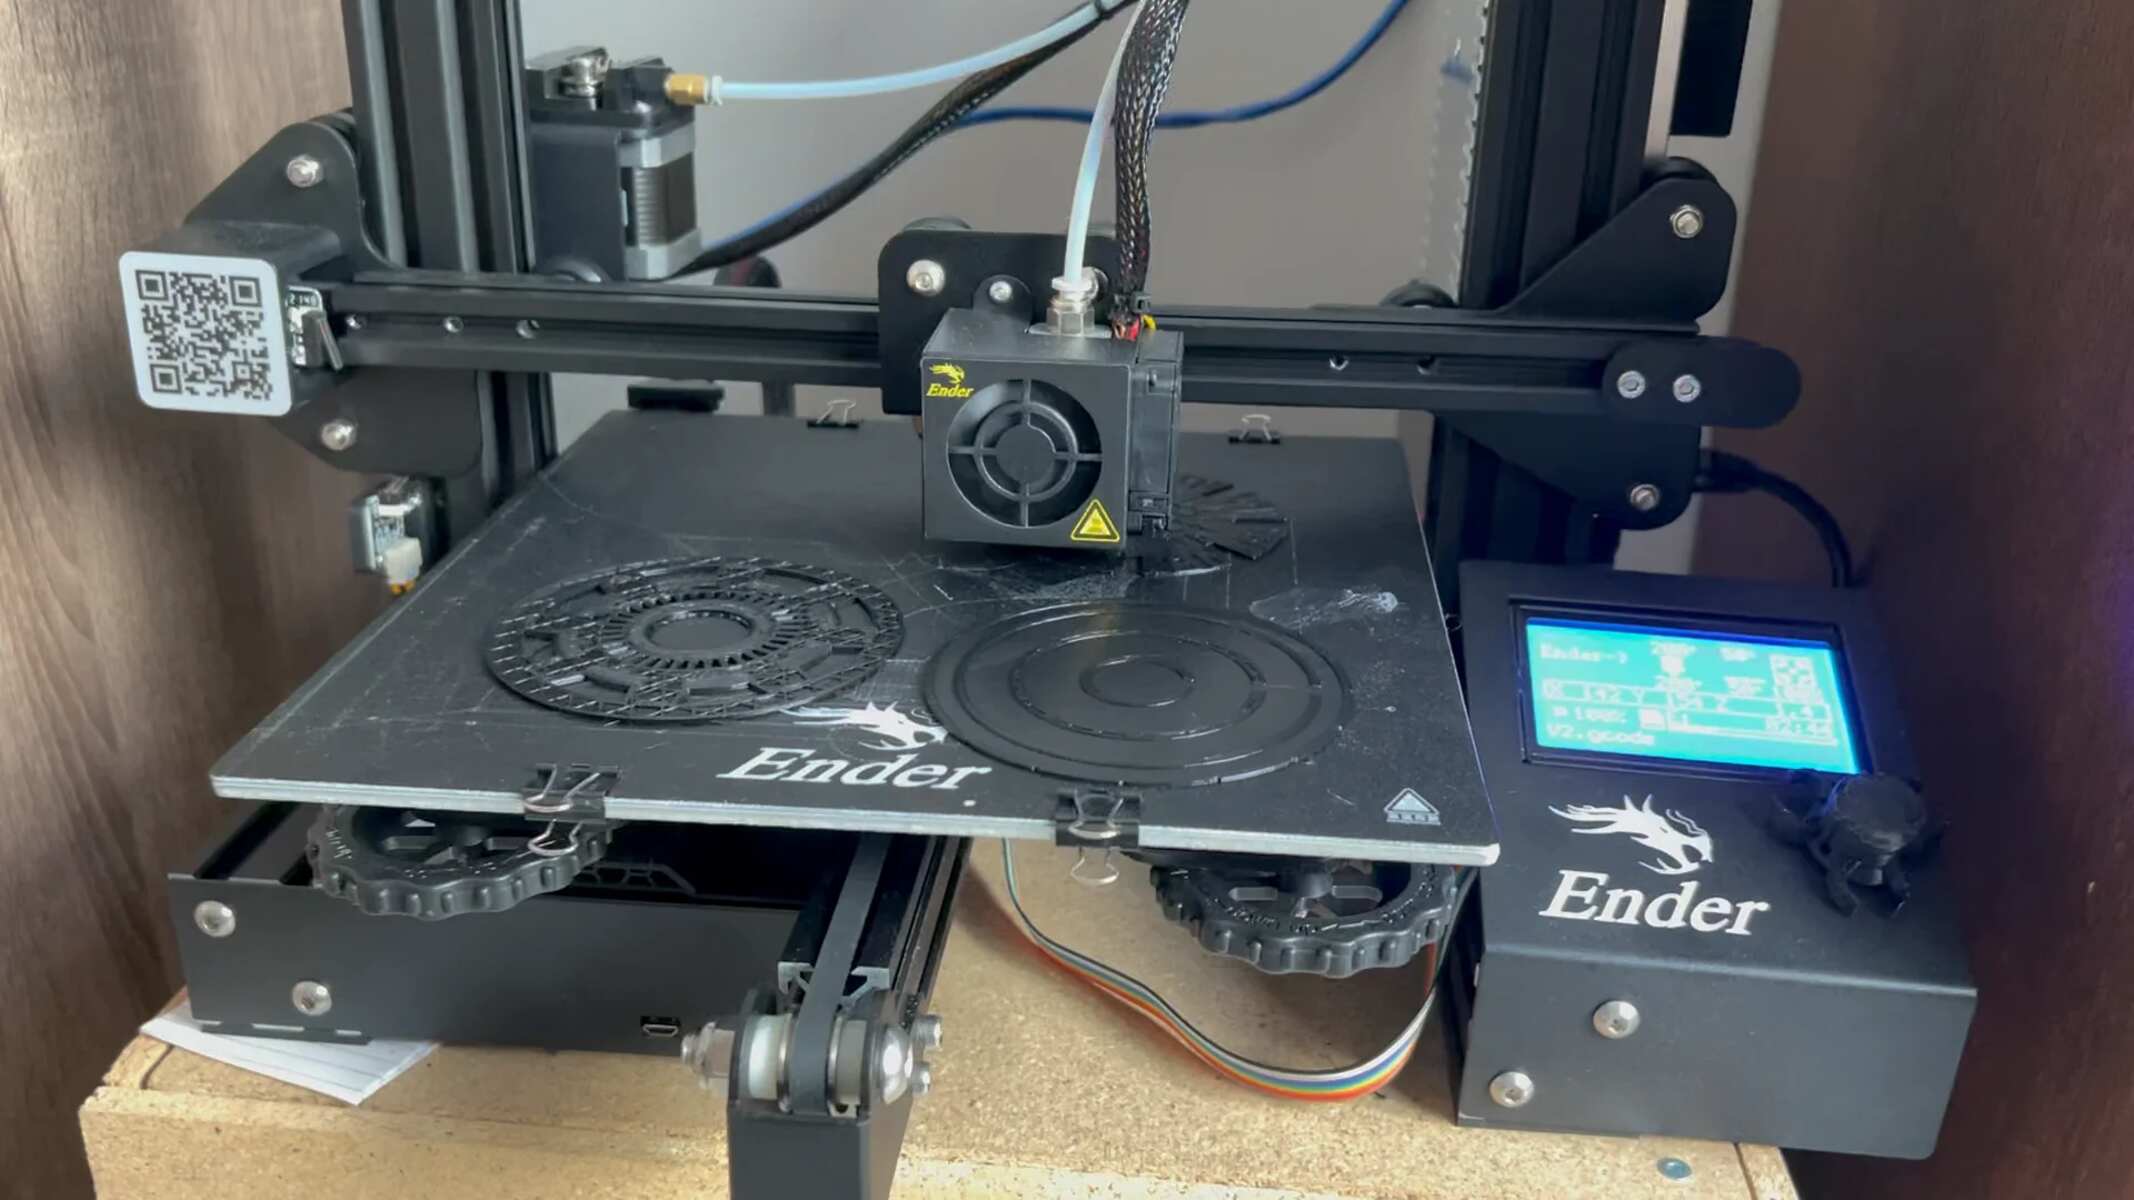 Why Does My 3D Printer Make A Clicking Noise